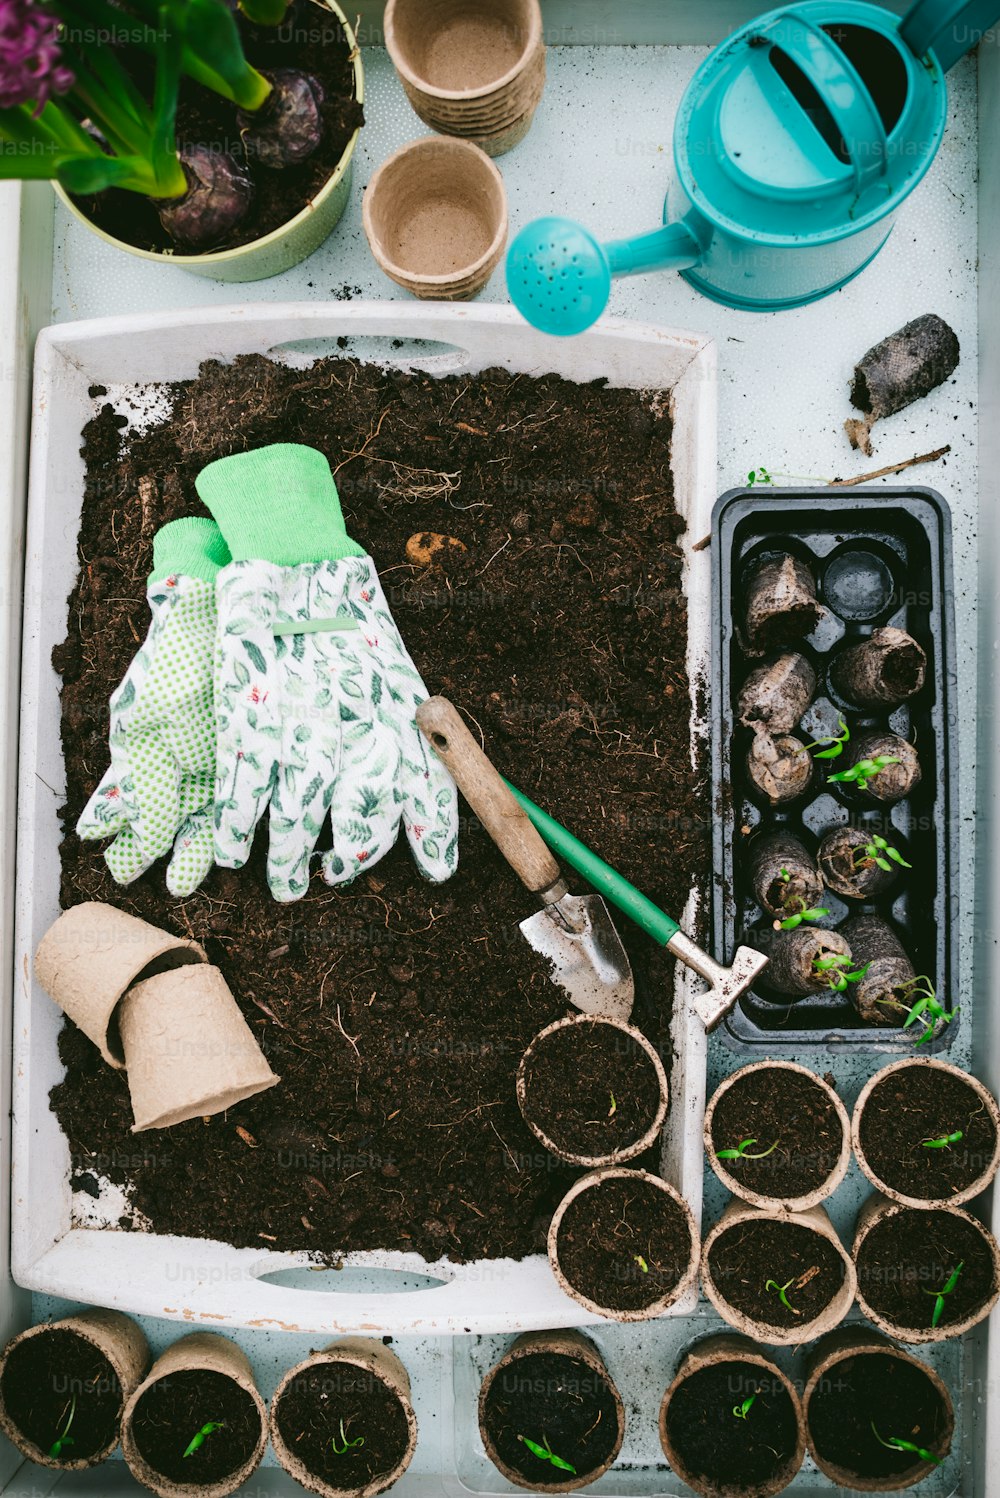 gardening supplies are laid out on a tray